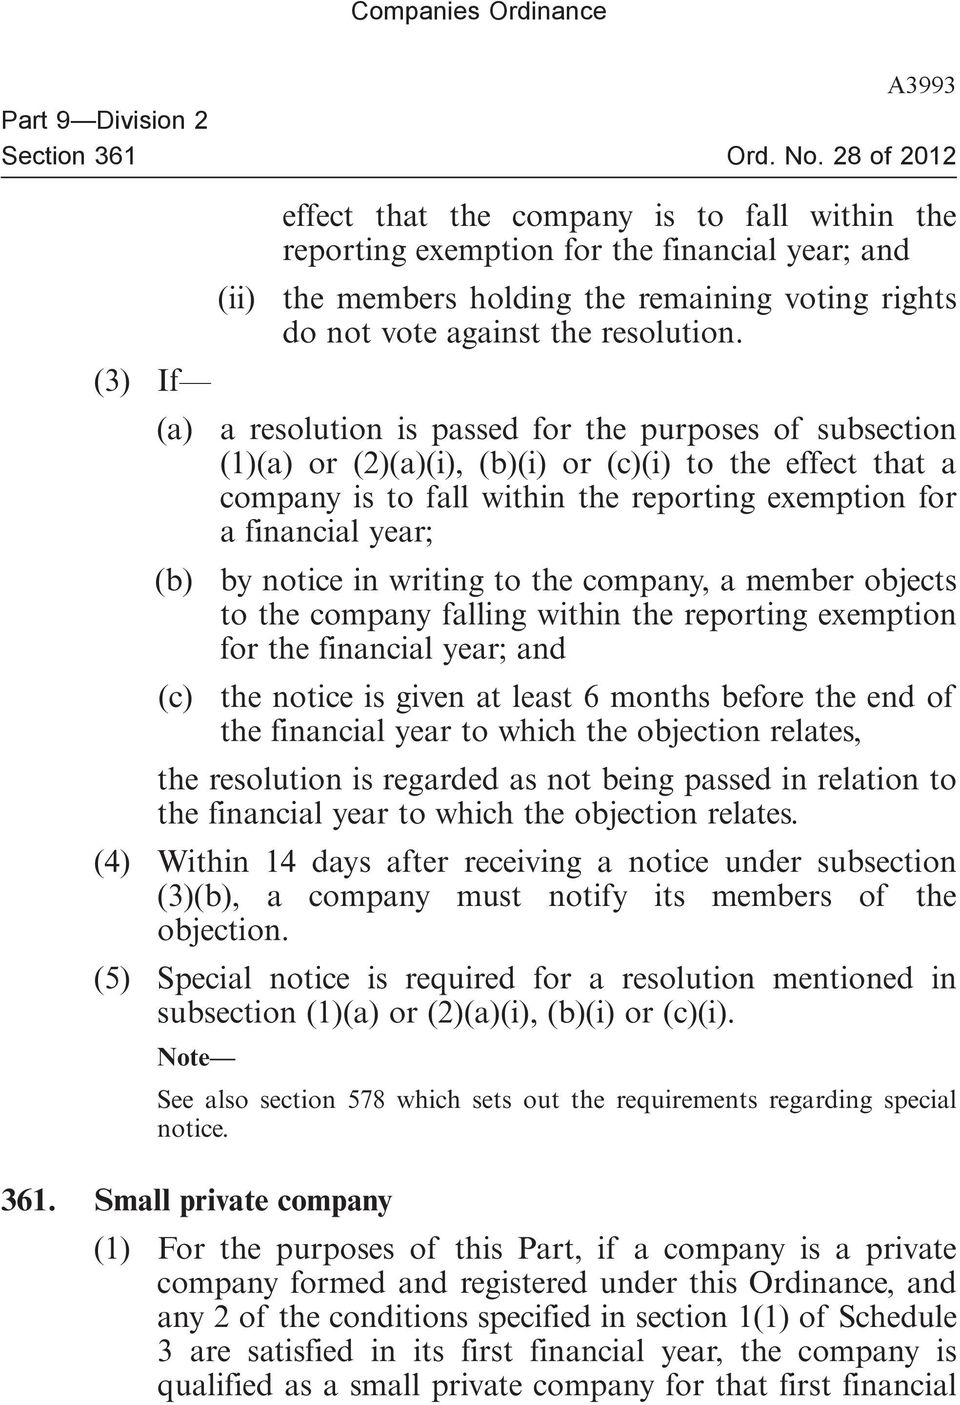 (3) If (a) a resolution is passed for the purposes of subsection (1)(a) or (2)(a)(i), (b)(i) or (c)(i) to the effect that a company is to fall within the reporting exemption for a financial year; (b)